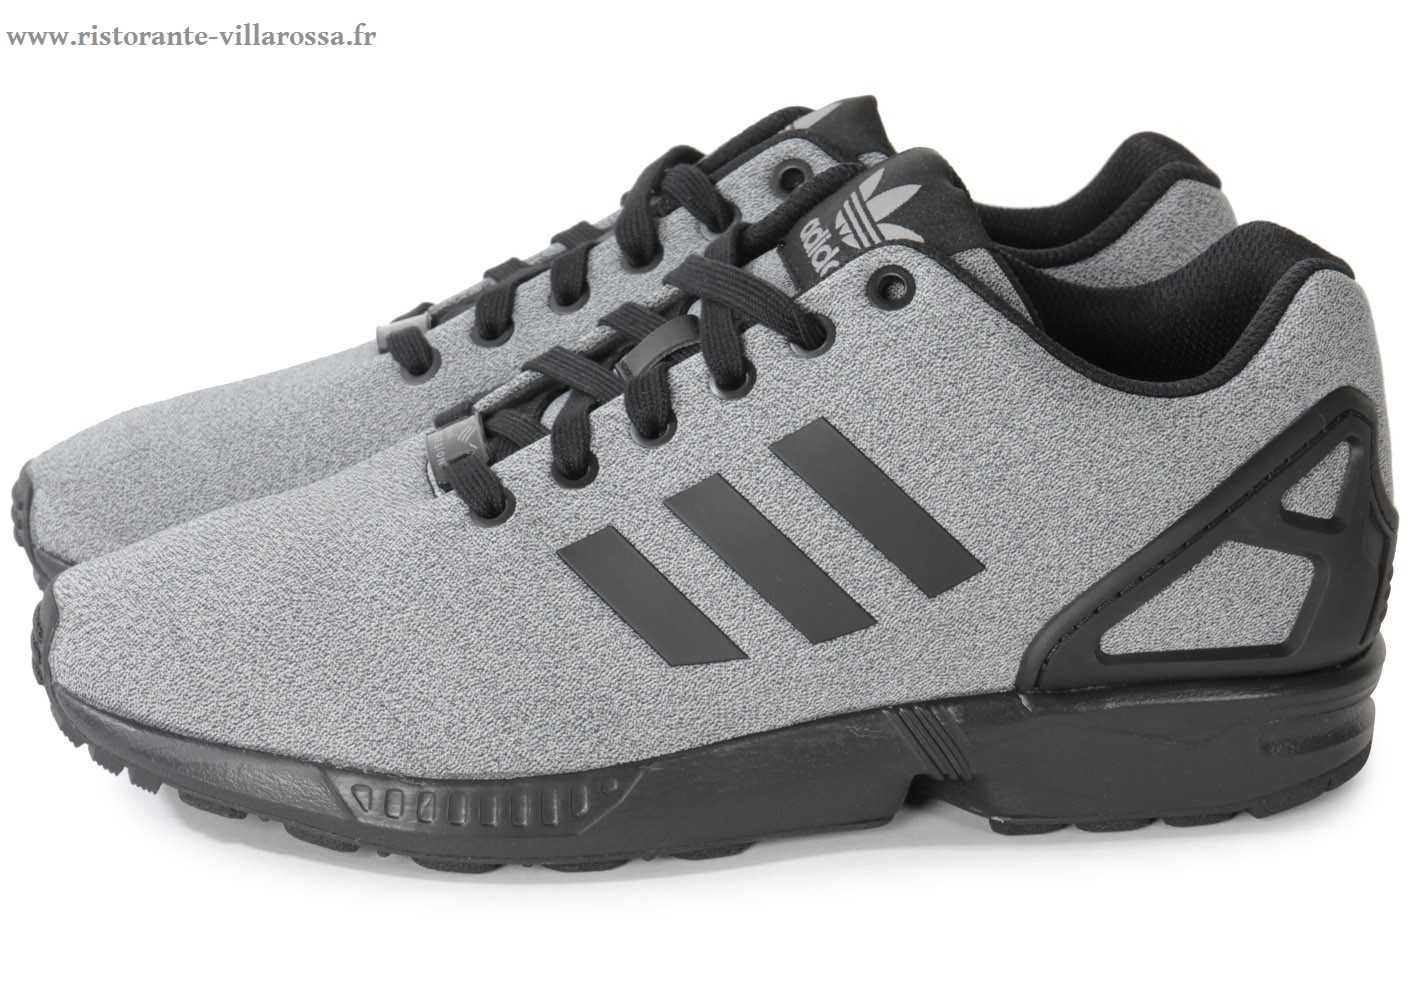 adidas zx flux France homme